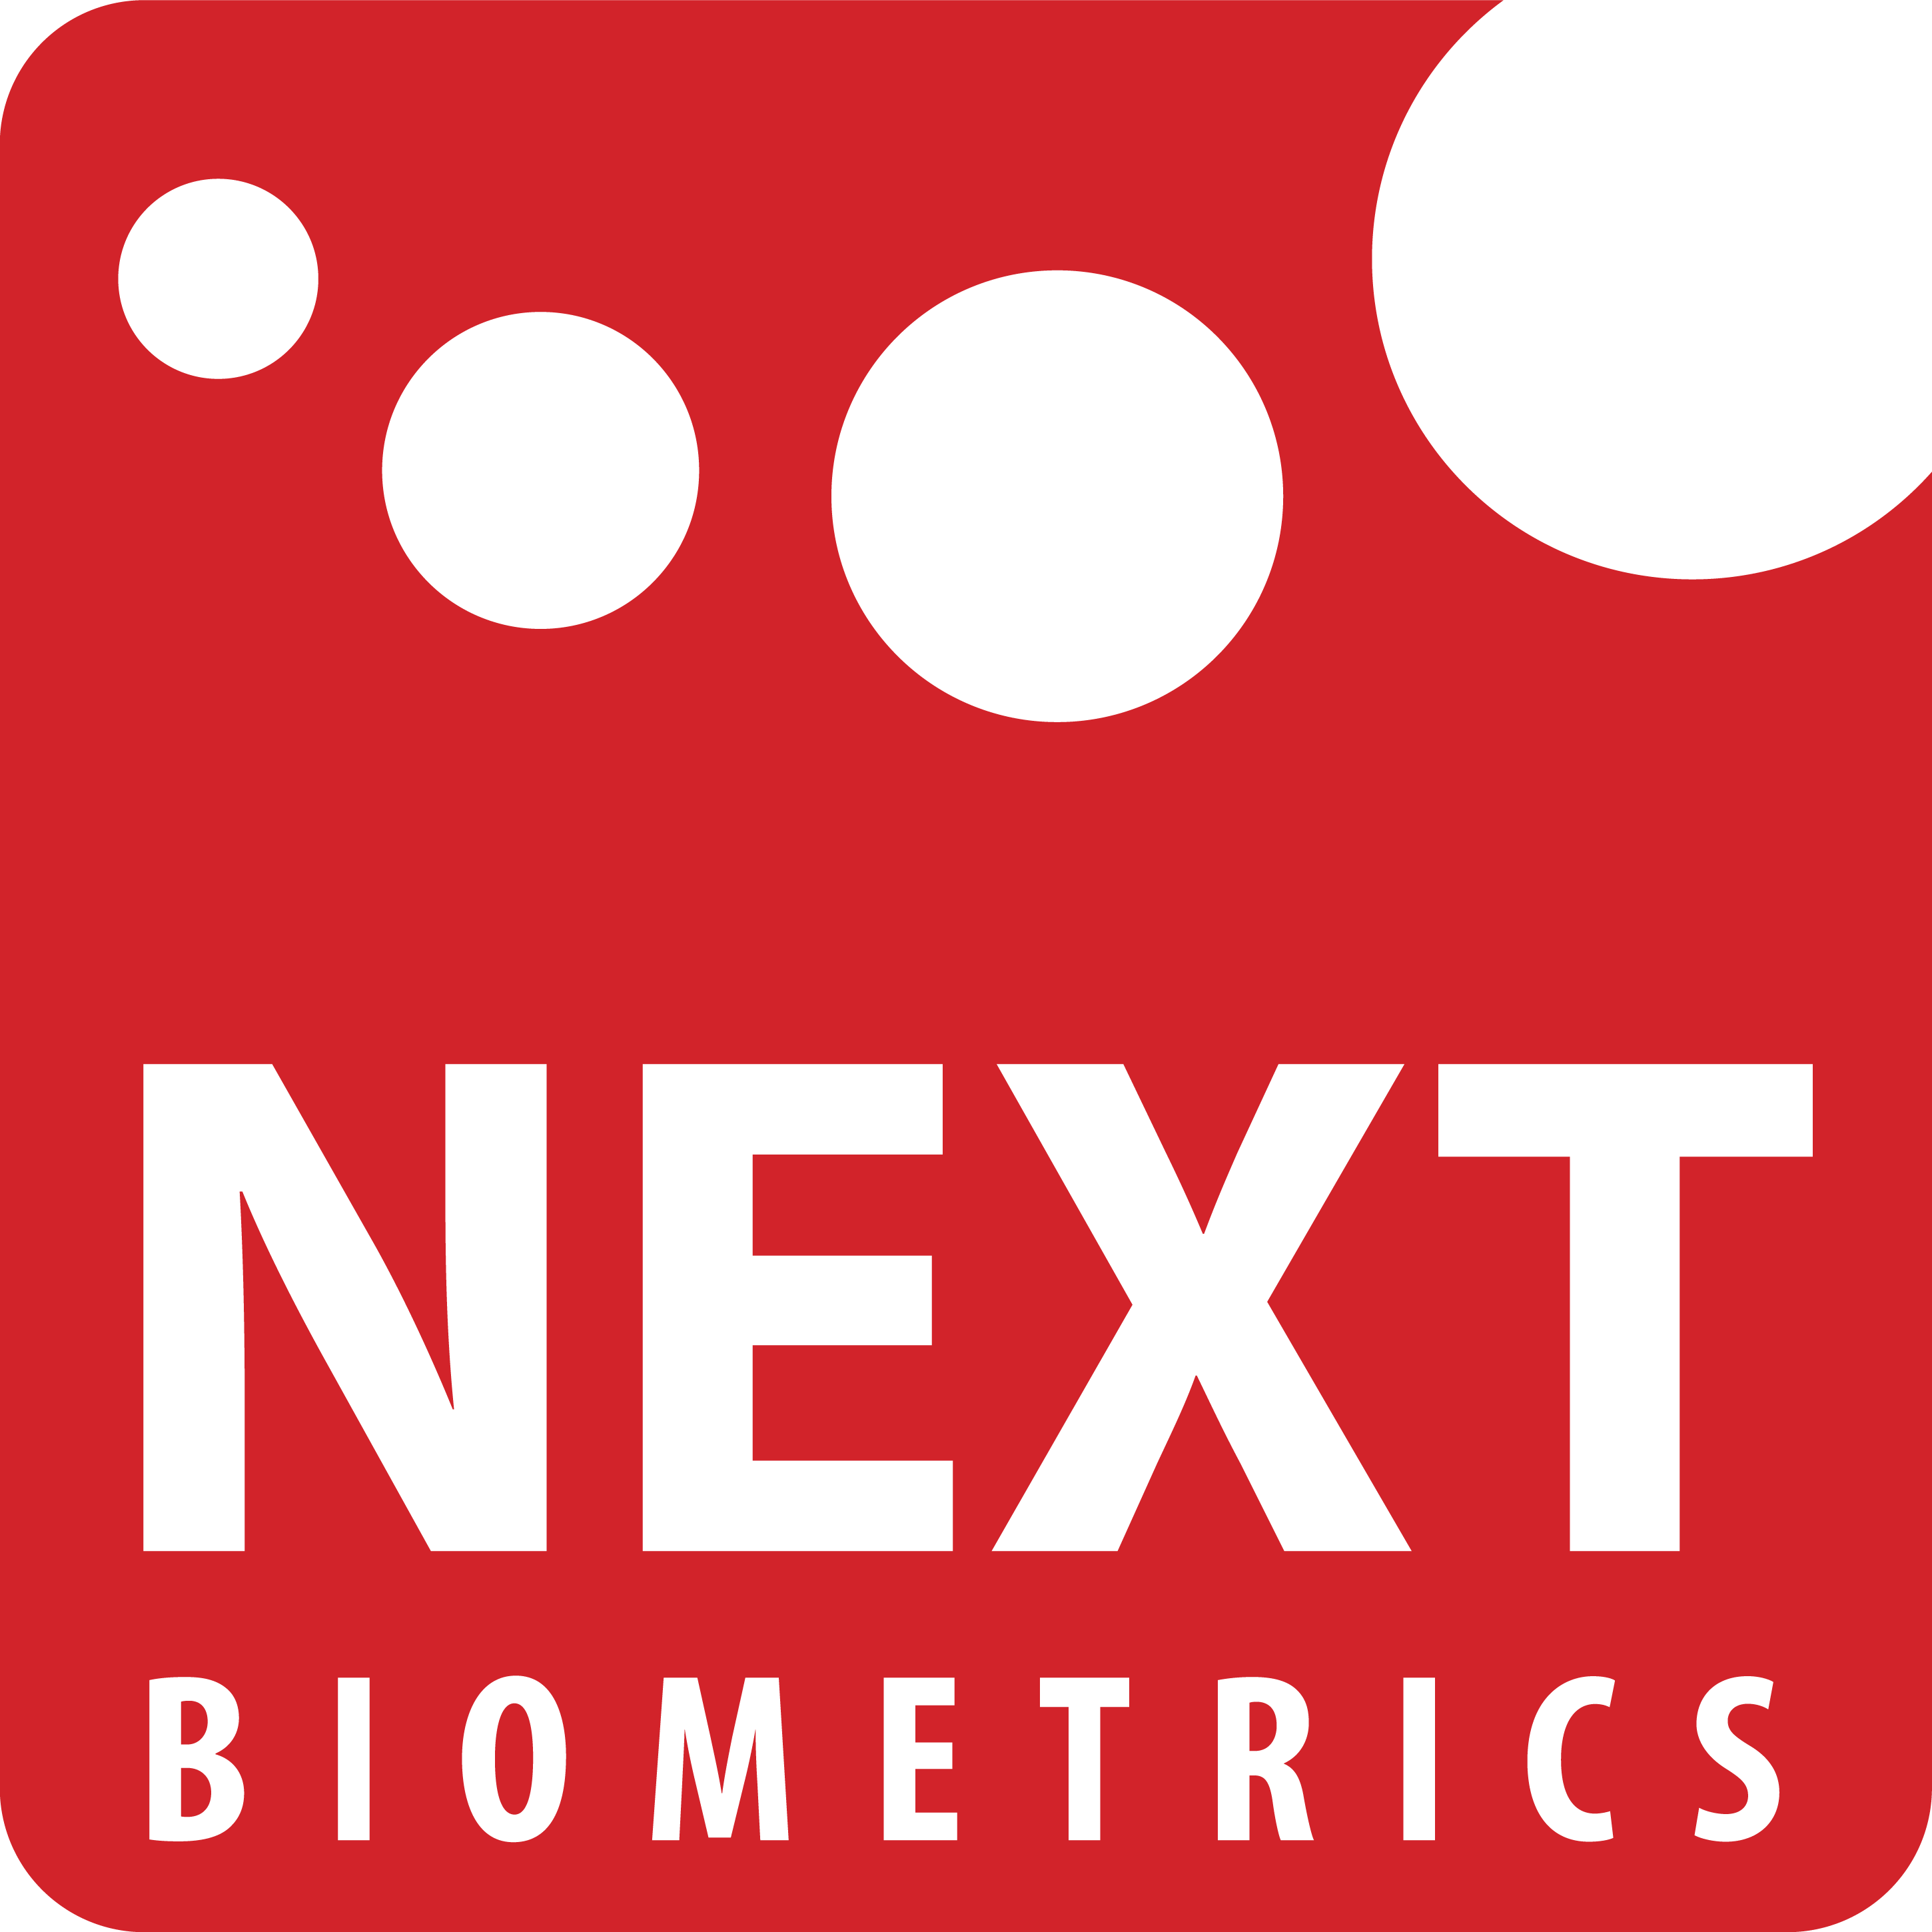 NEXT Biometrics, headquartered in Oslo, Norway, offers high quality area fingerprint sensors at a fraction of the prices of comparable competitors.